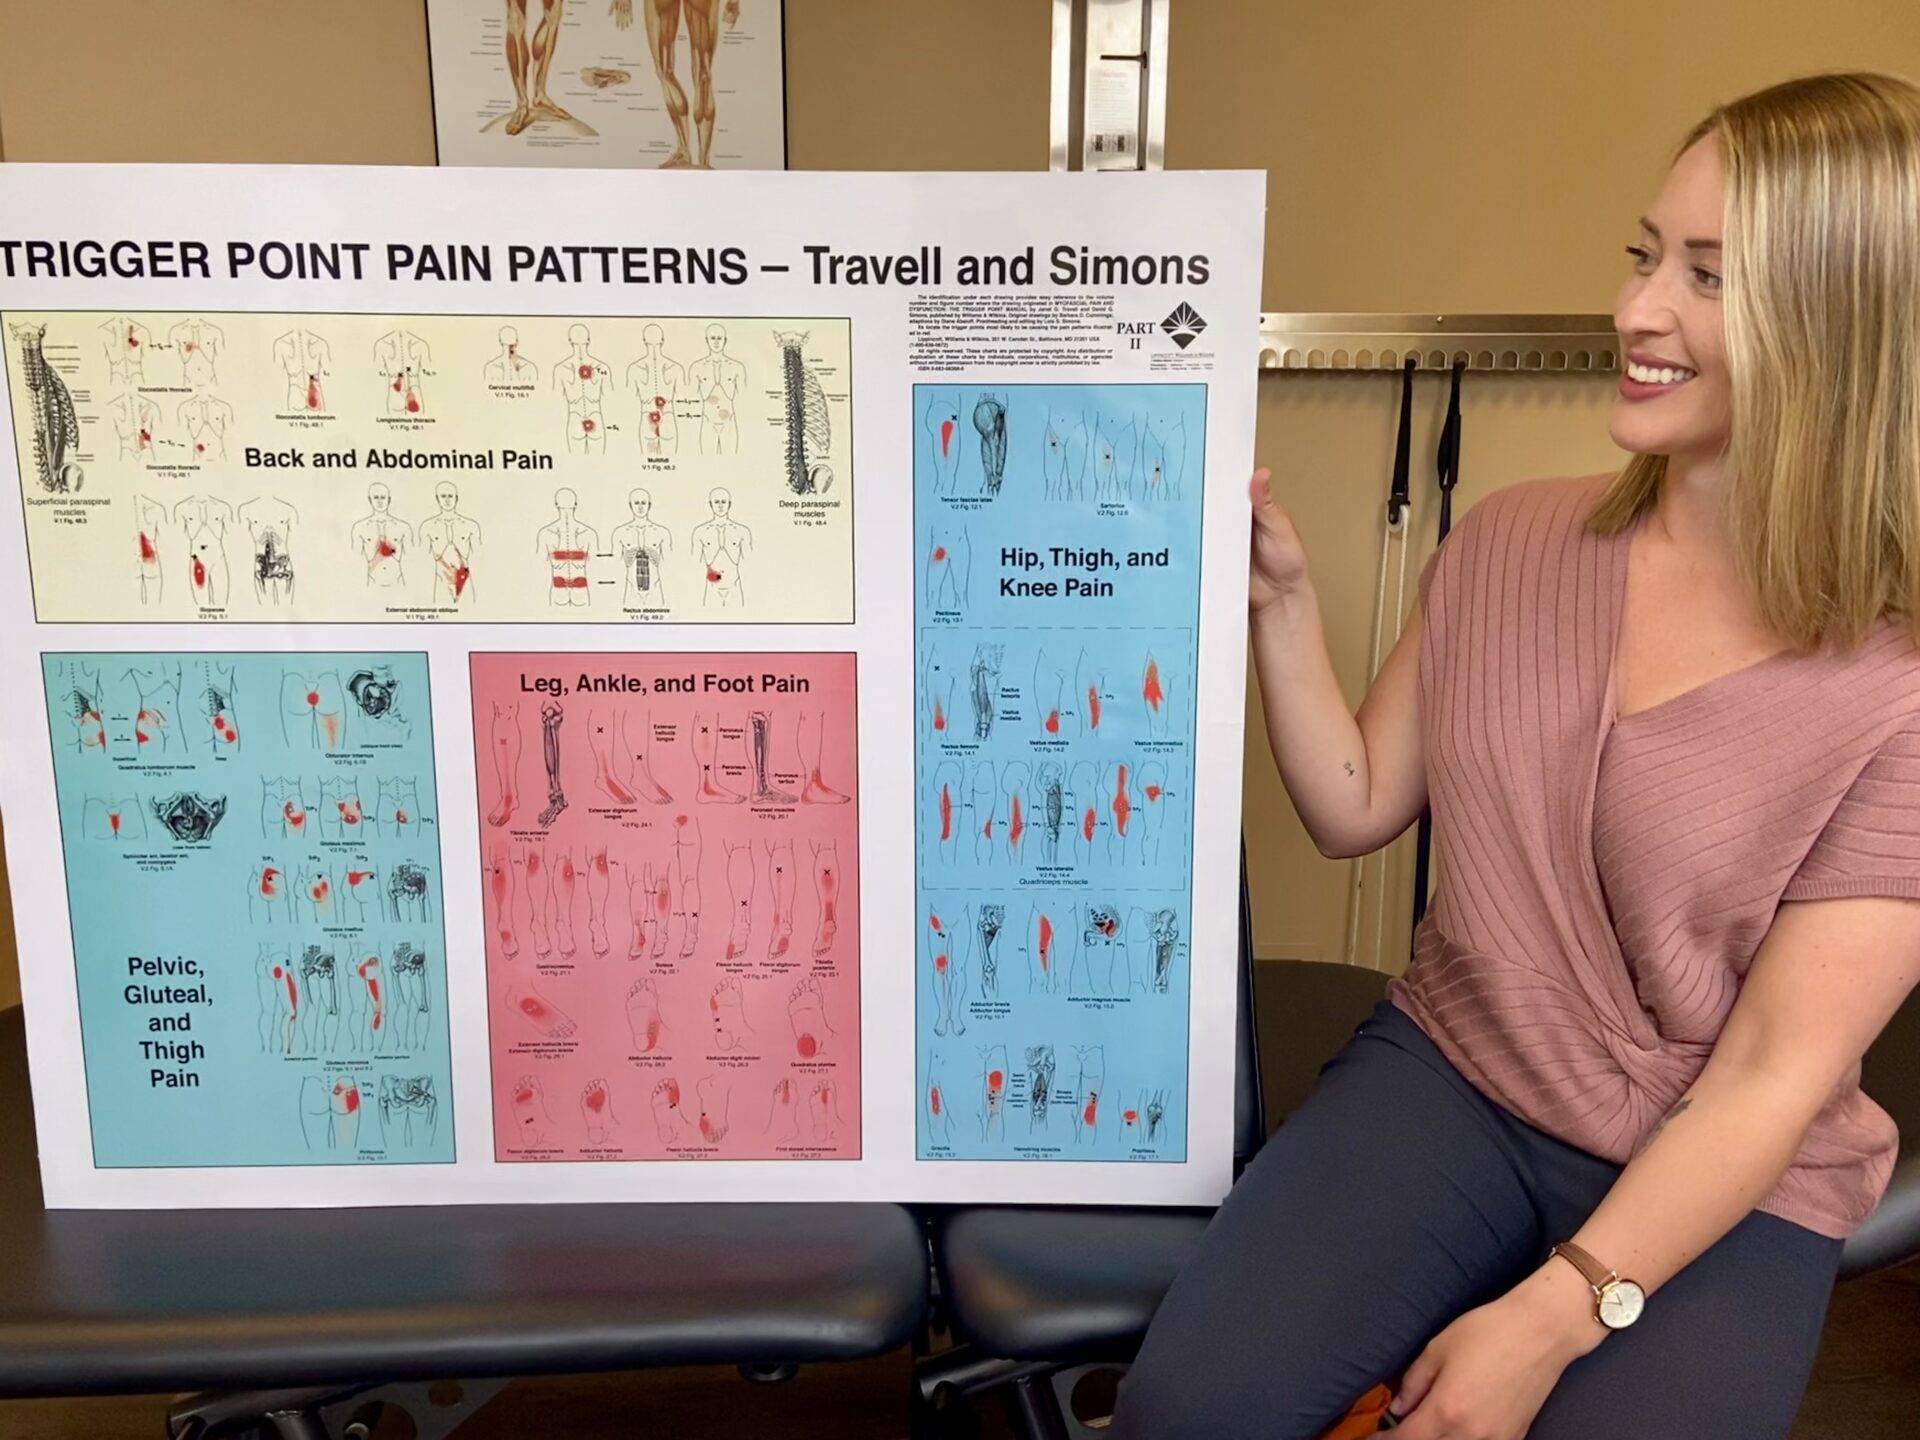 Trigger Point Pain patterns